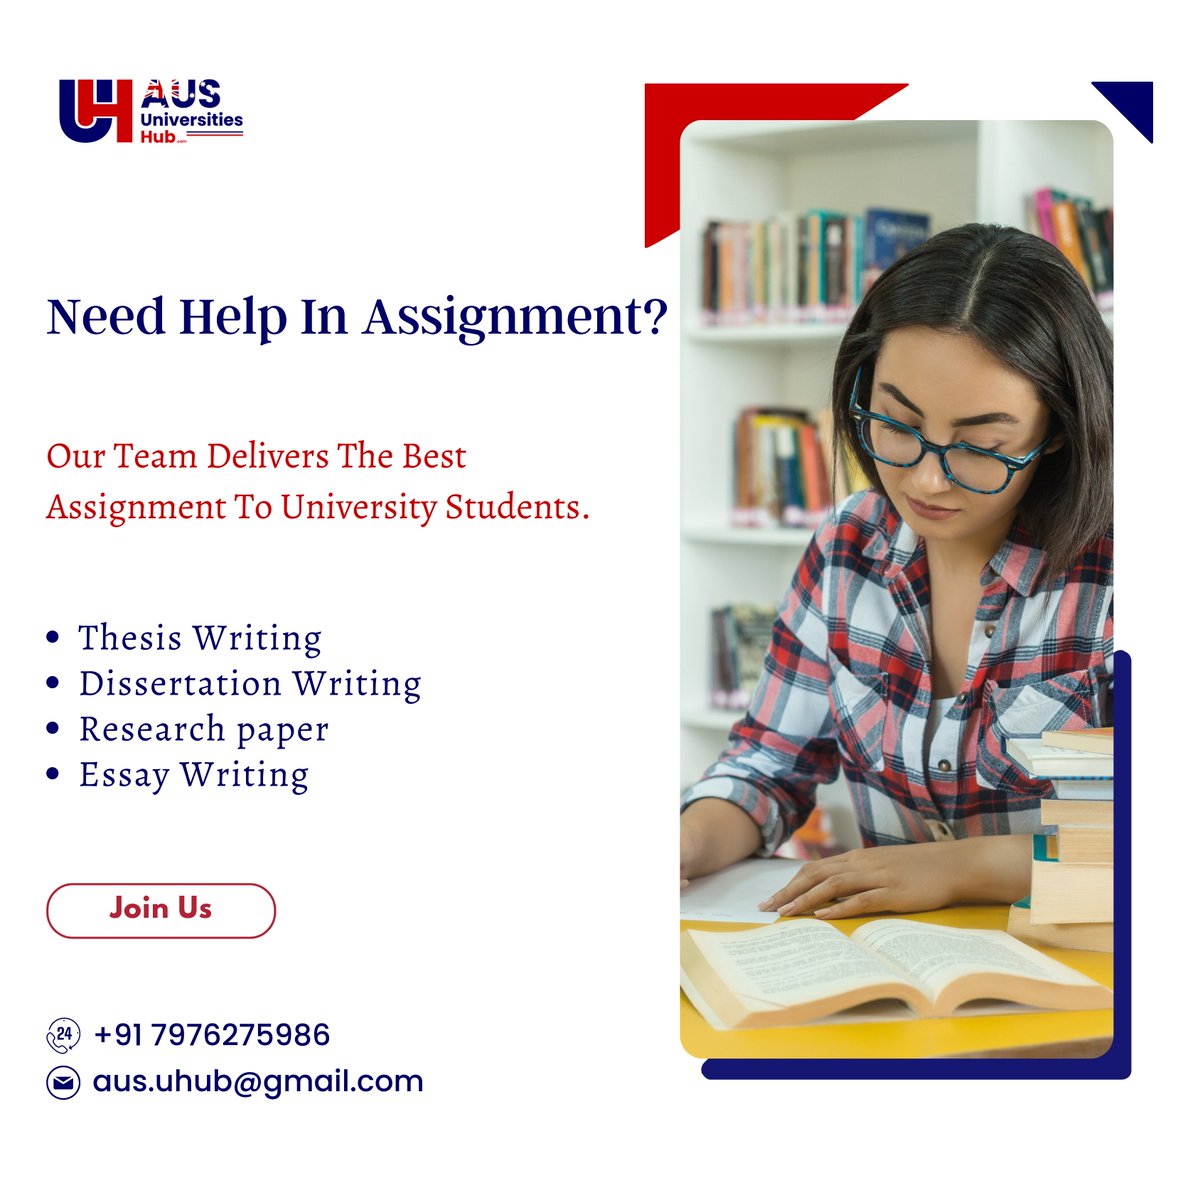 Need Help In Assignment?
Contact -7976275986

#assignmentwriting #research #students #essays
#student #academicwriting #paper #essaywriter
#education #homeworkhelpt #studentlife #assignmenthelper #electricalhacksandotherscrewups #electricallife #electricalsky #Australia #UniHUB